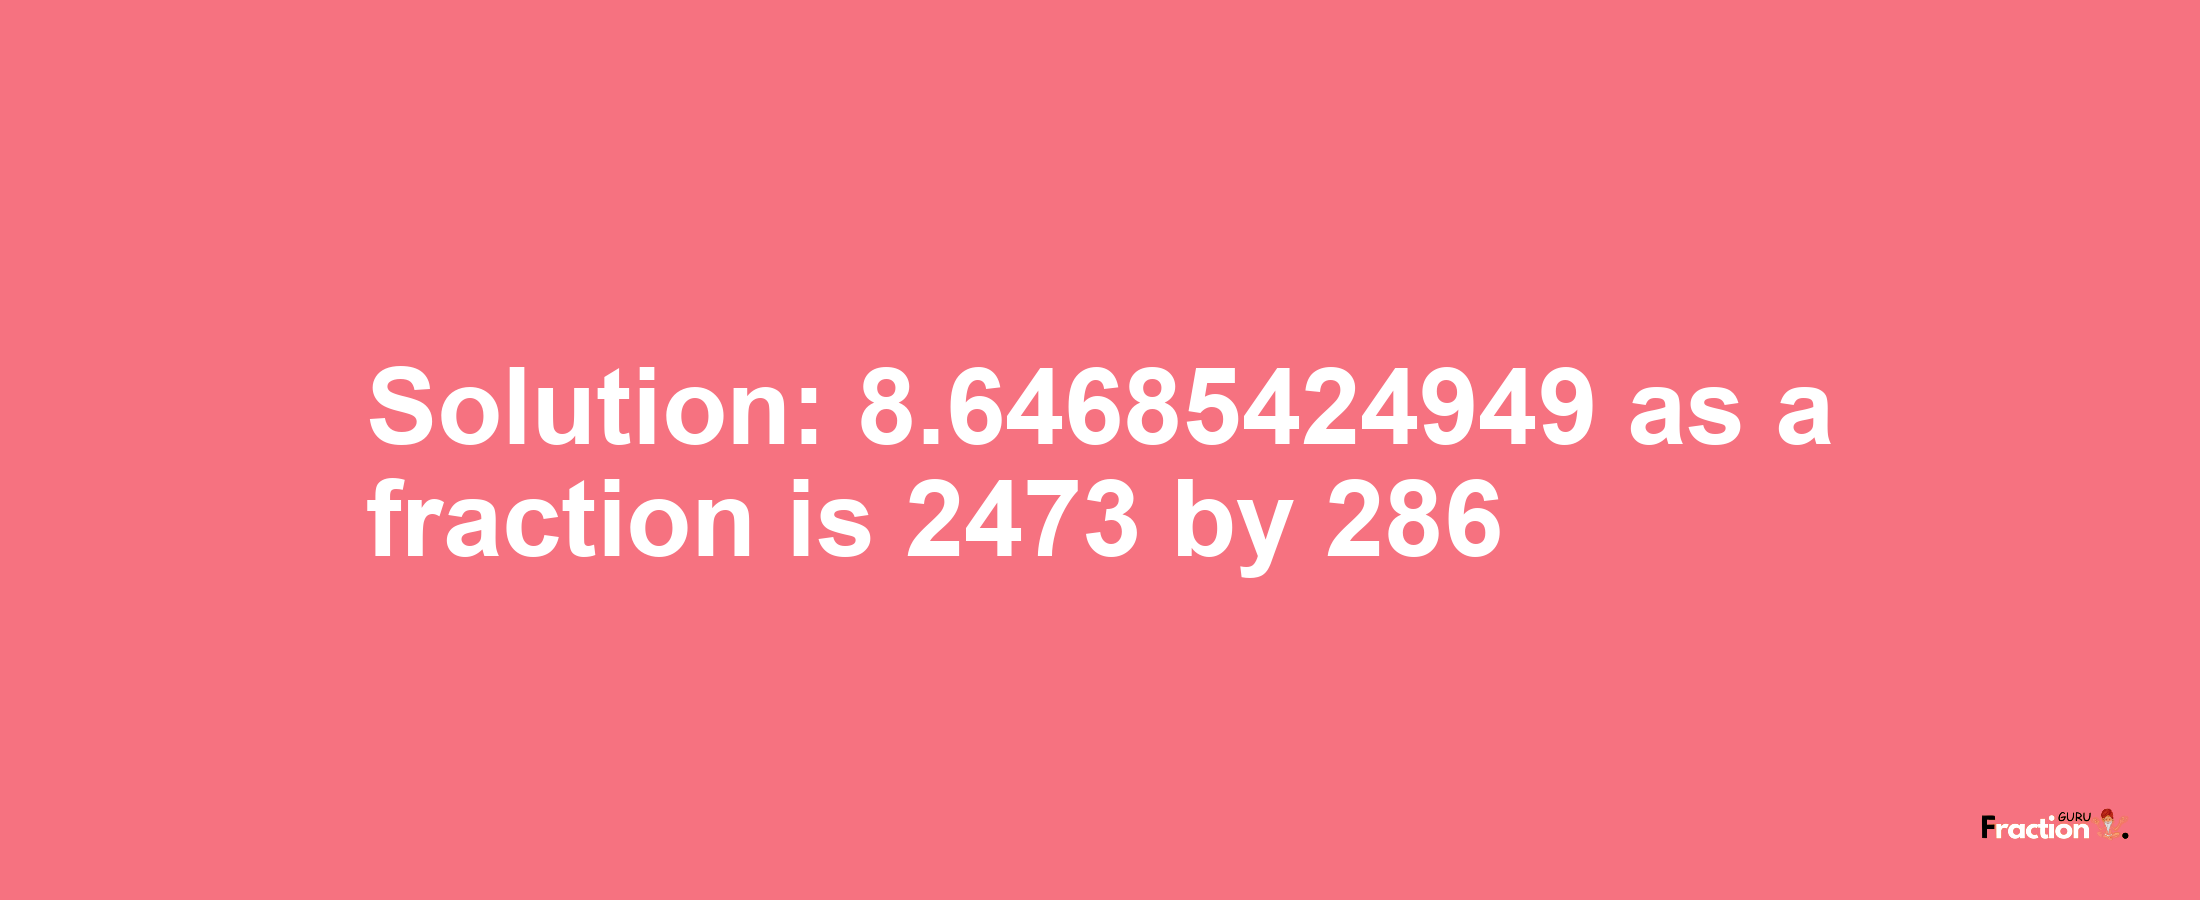 Solution:8.64685424949 as a fraction is 2473/286